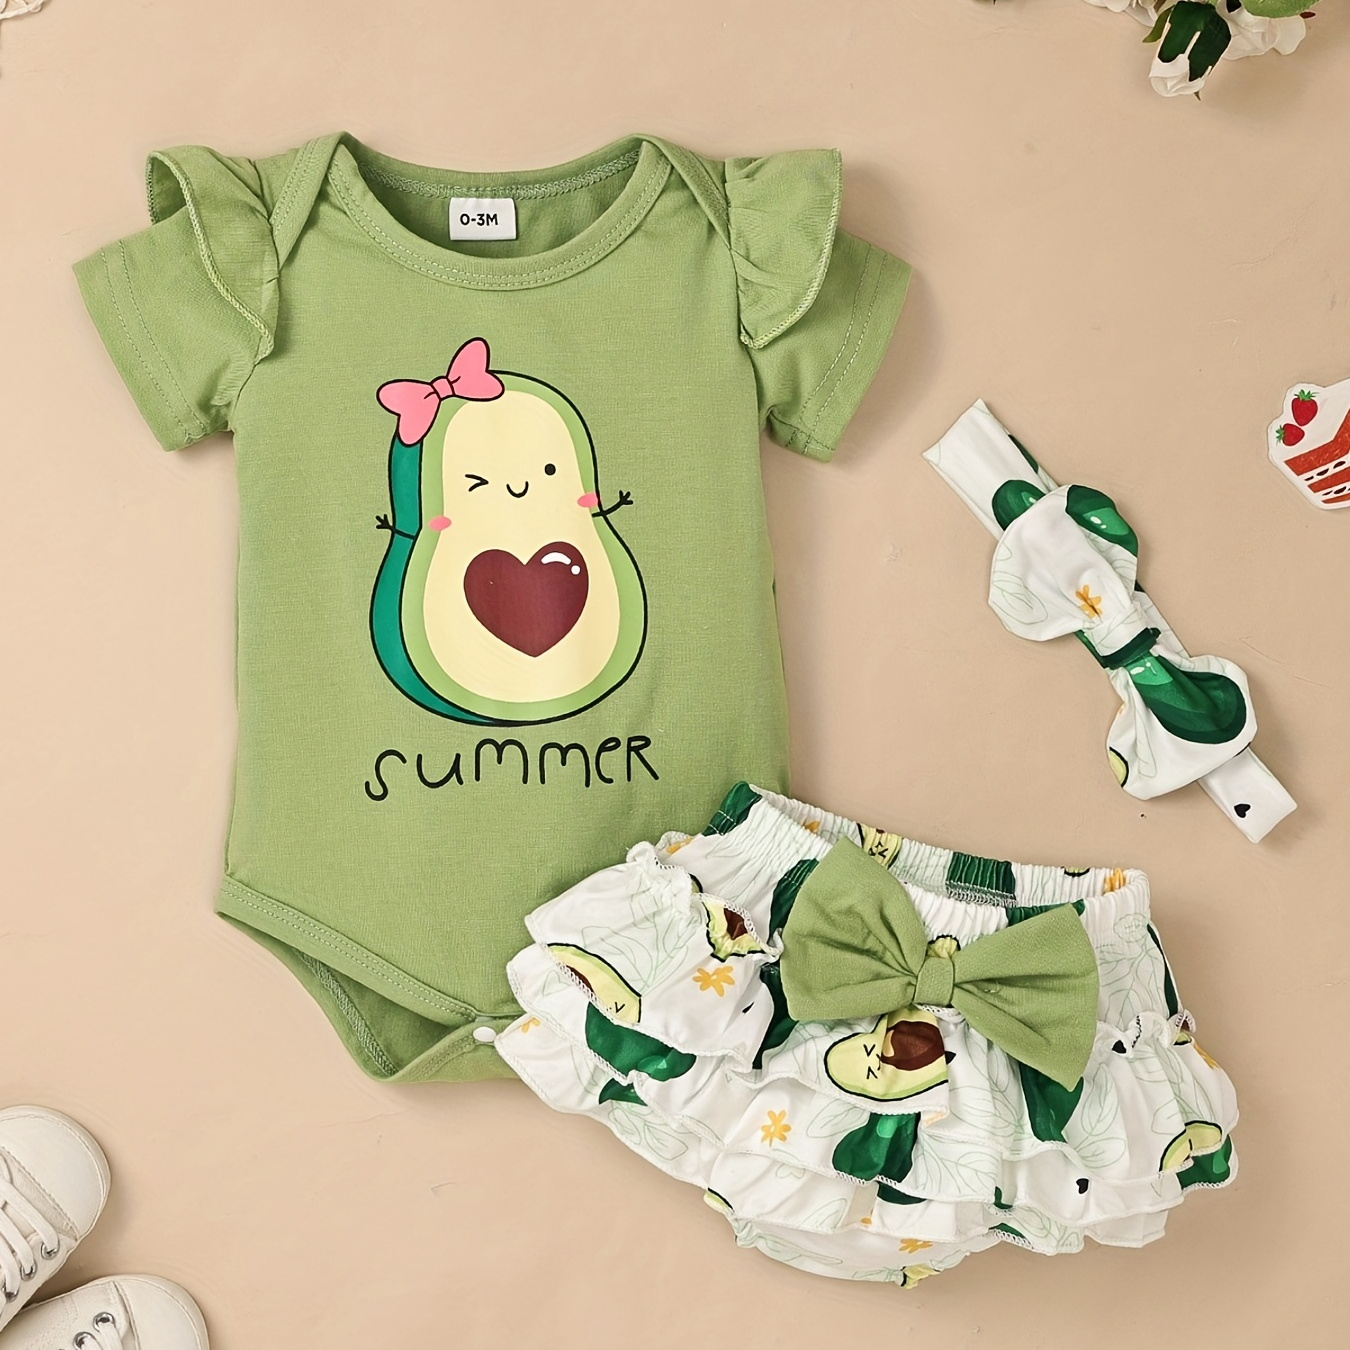 

Adorable 3-piece Summer Outfit For Baby Girls - Avocado/sunflower Romper, Bow Shorts Dress & Headband Set!